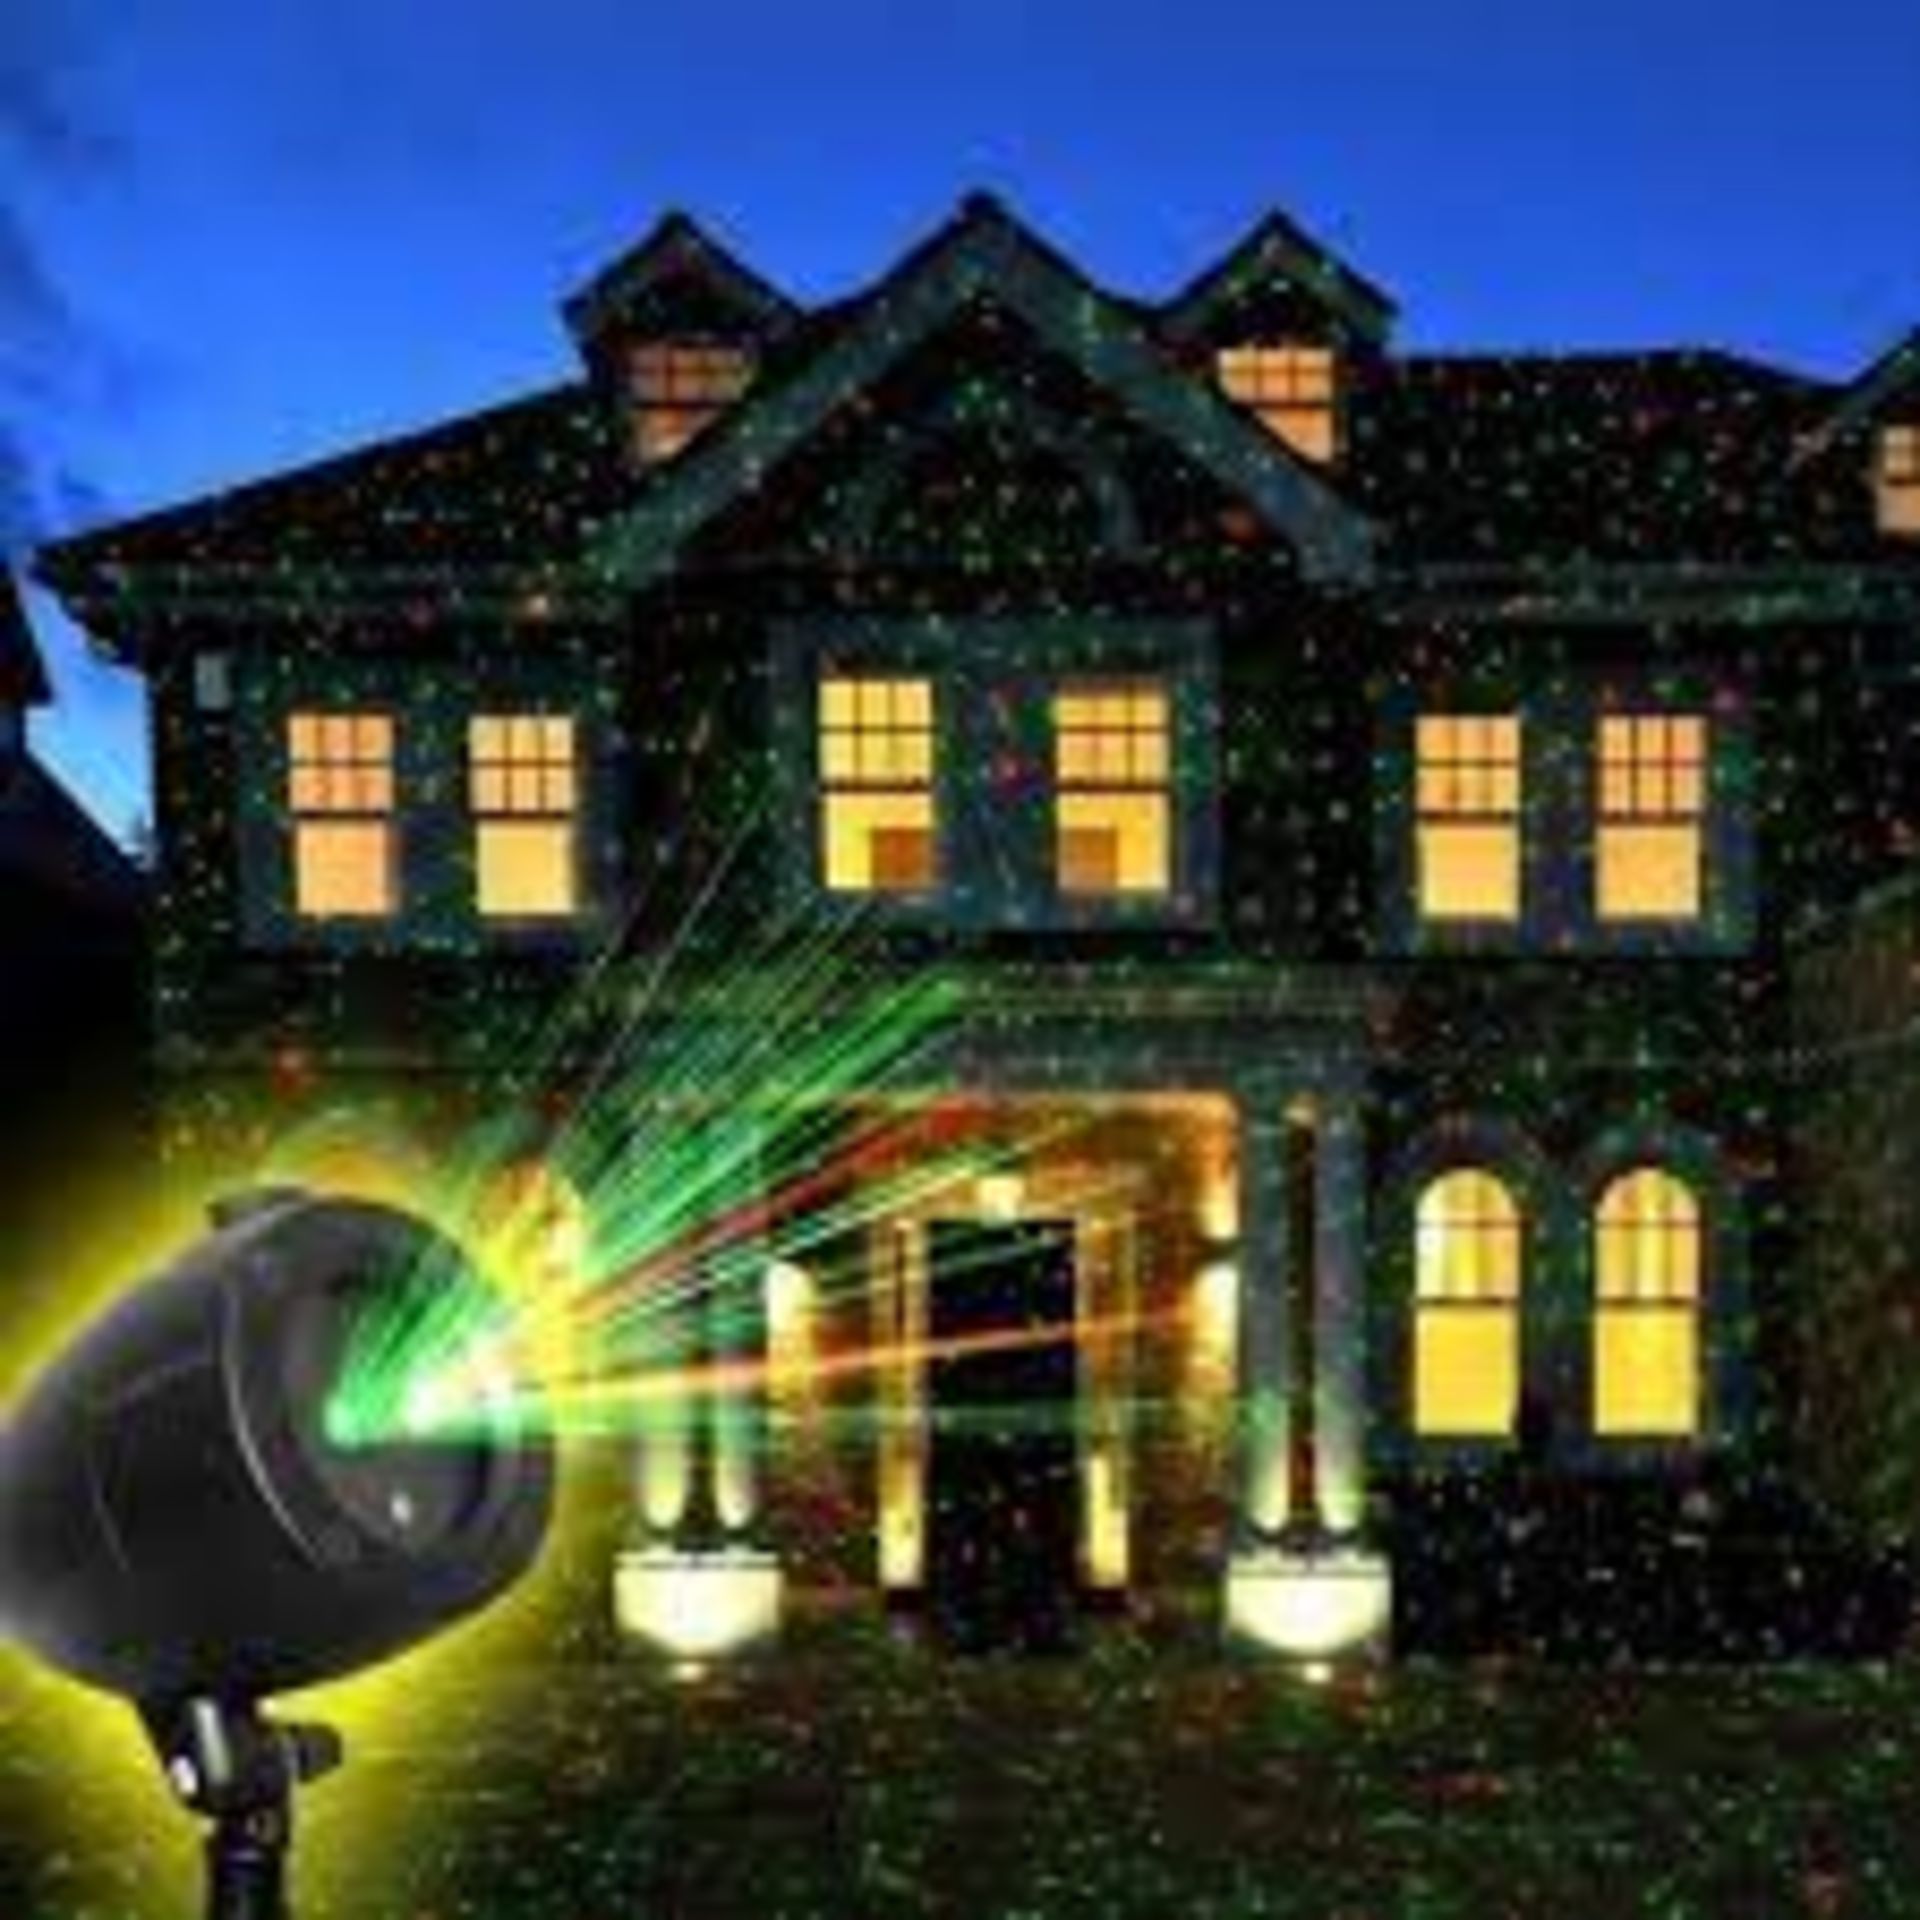 1 x StarTastic Motion Laser Projector - Starry Light Display Suitable For Christmas, Weddings, - Image 4 of 4